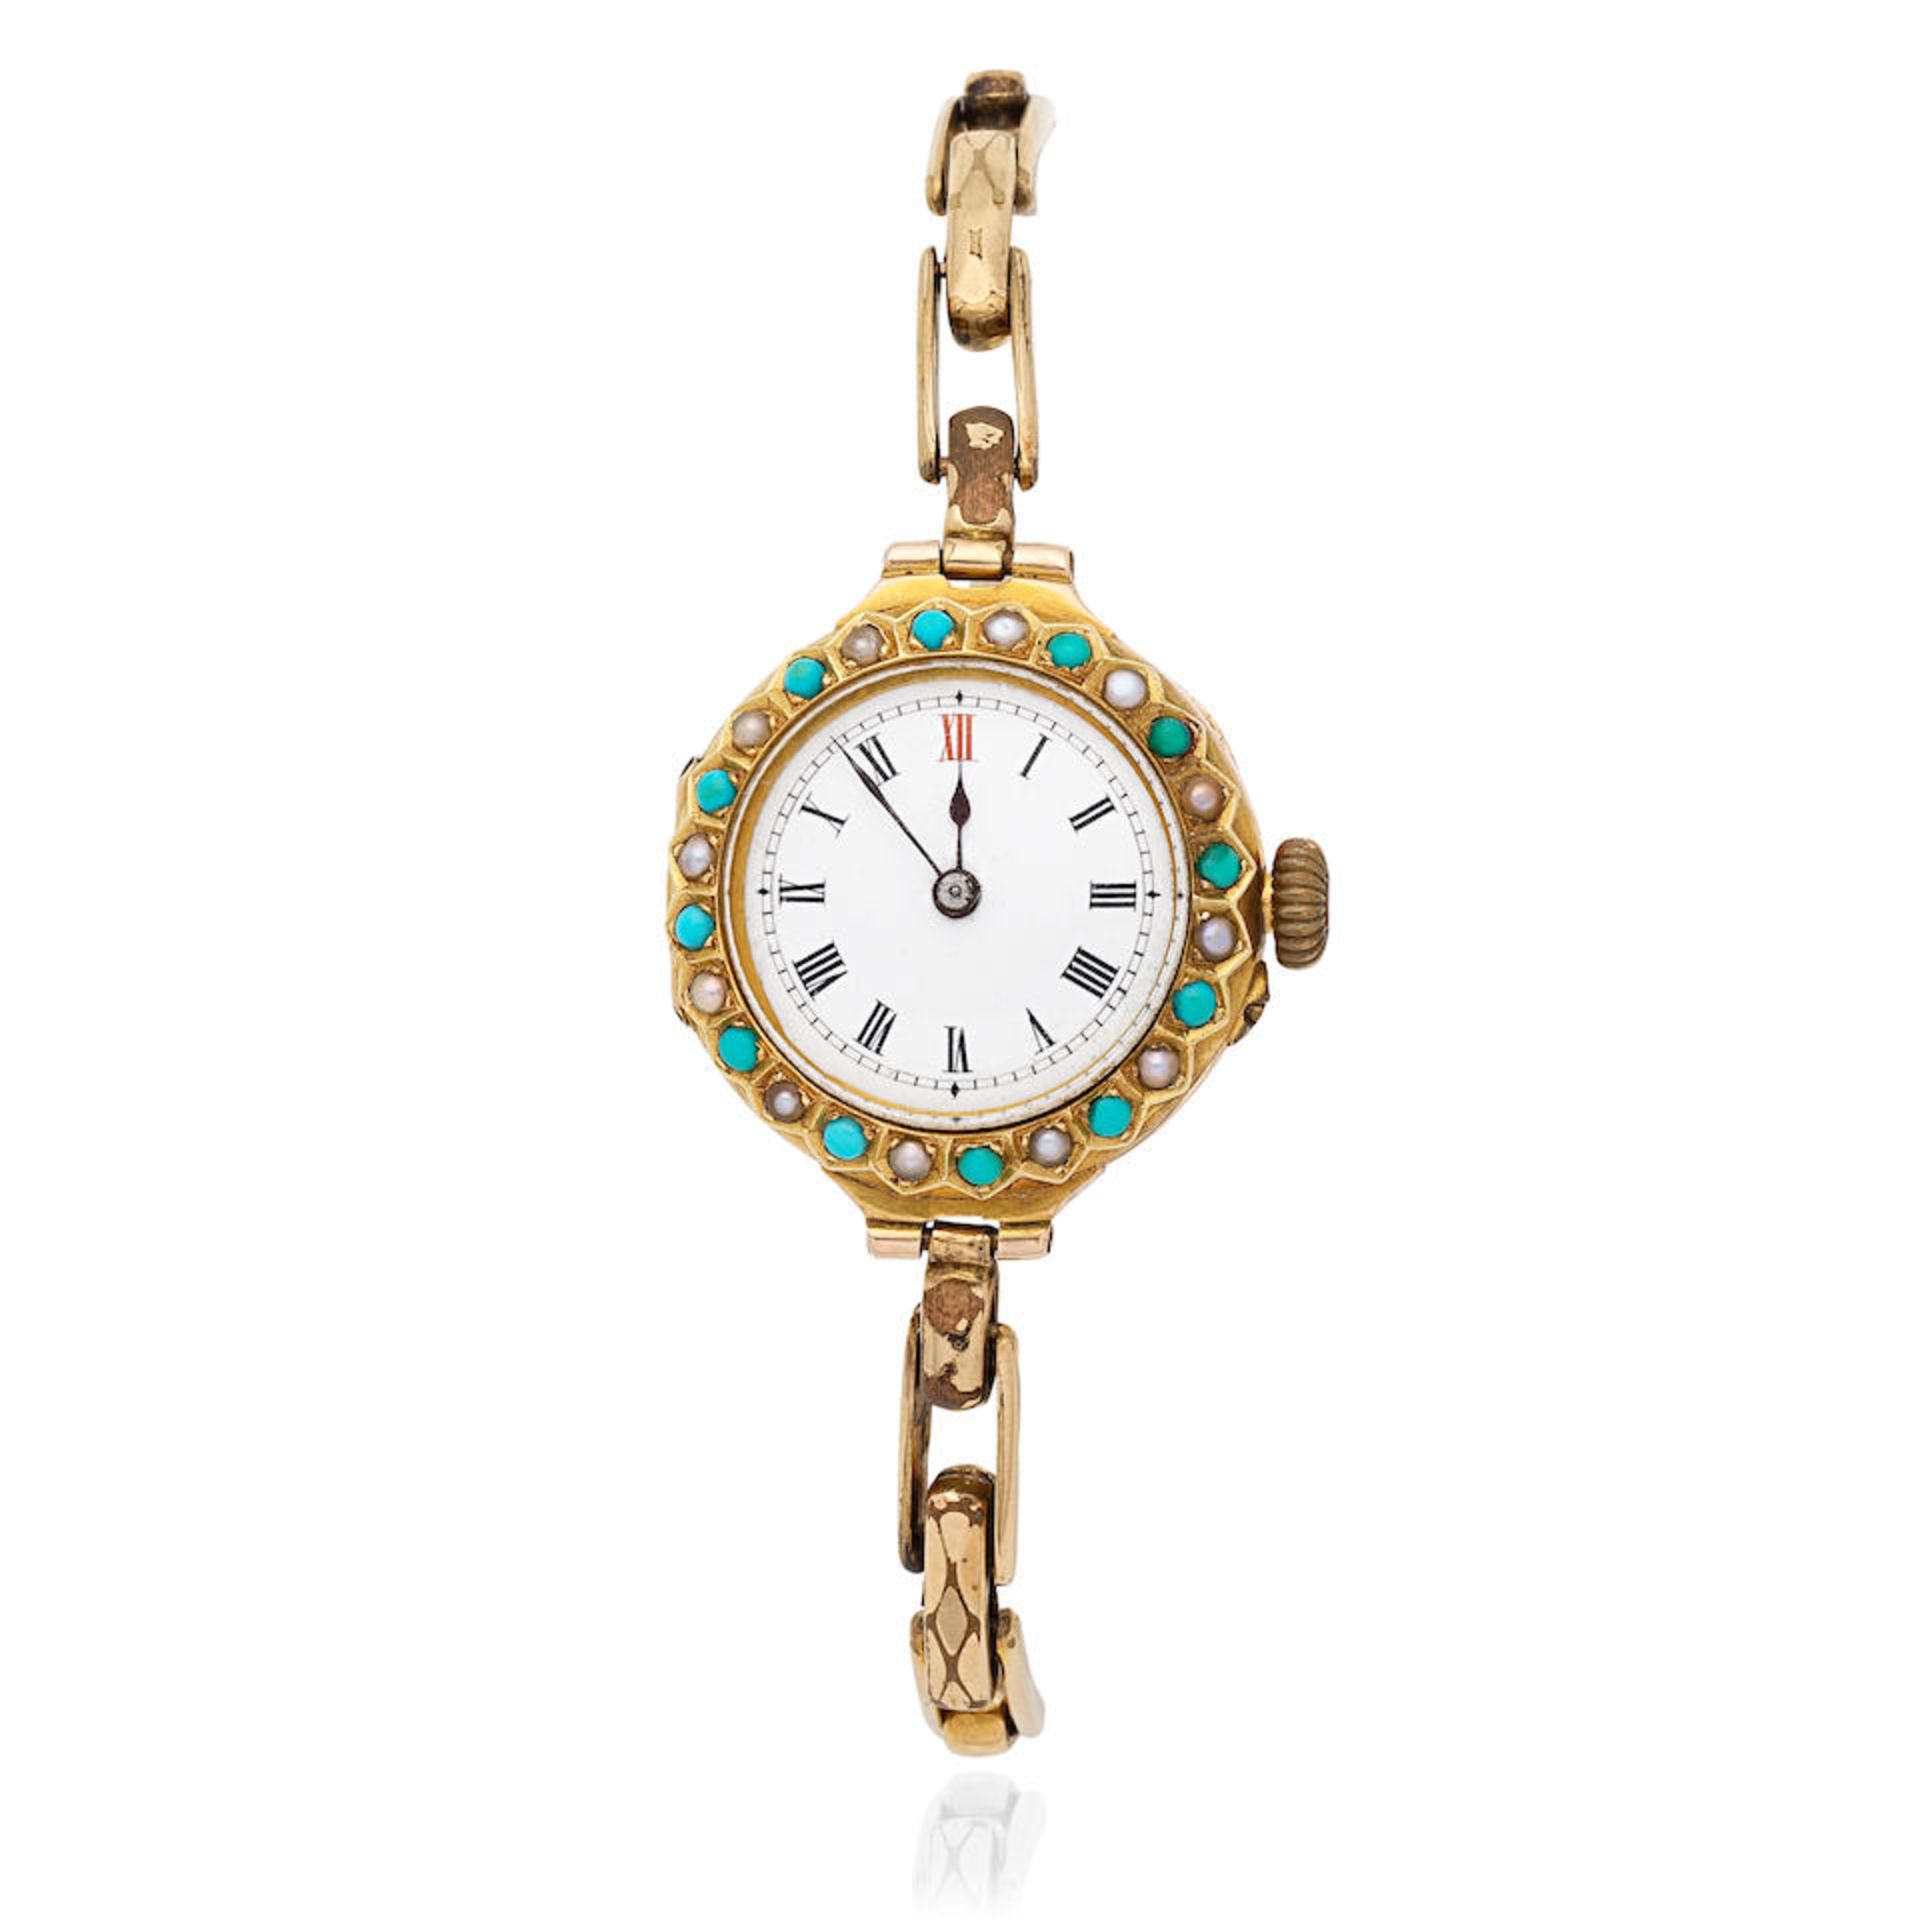 A 9K gold manual wind bracelet watch with seed pearl and turquoise set bezel Circa 1920